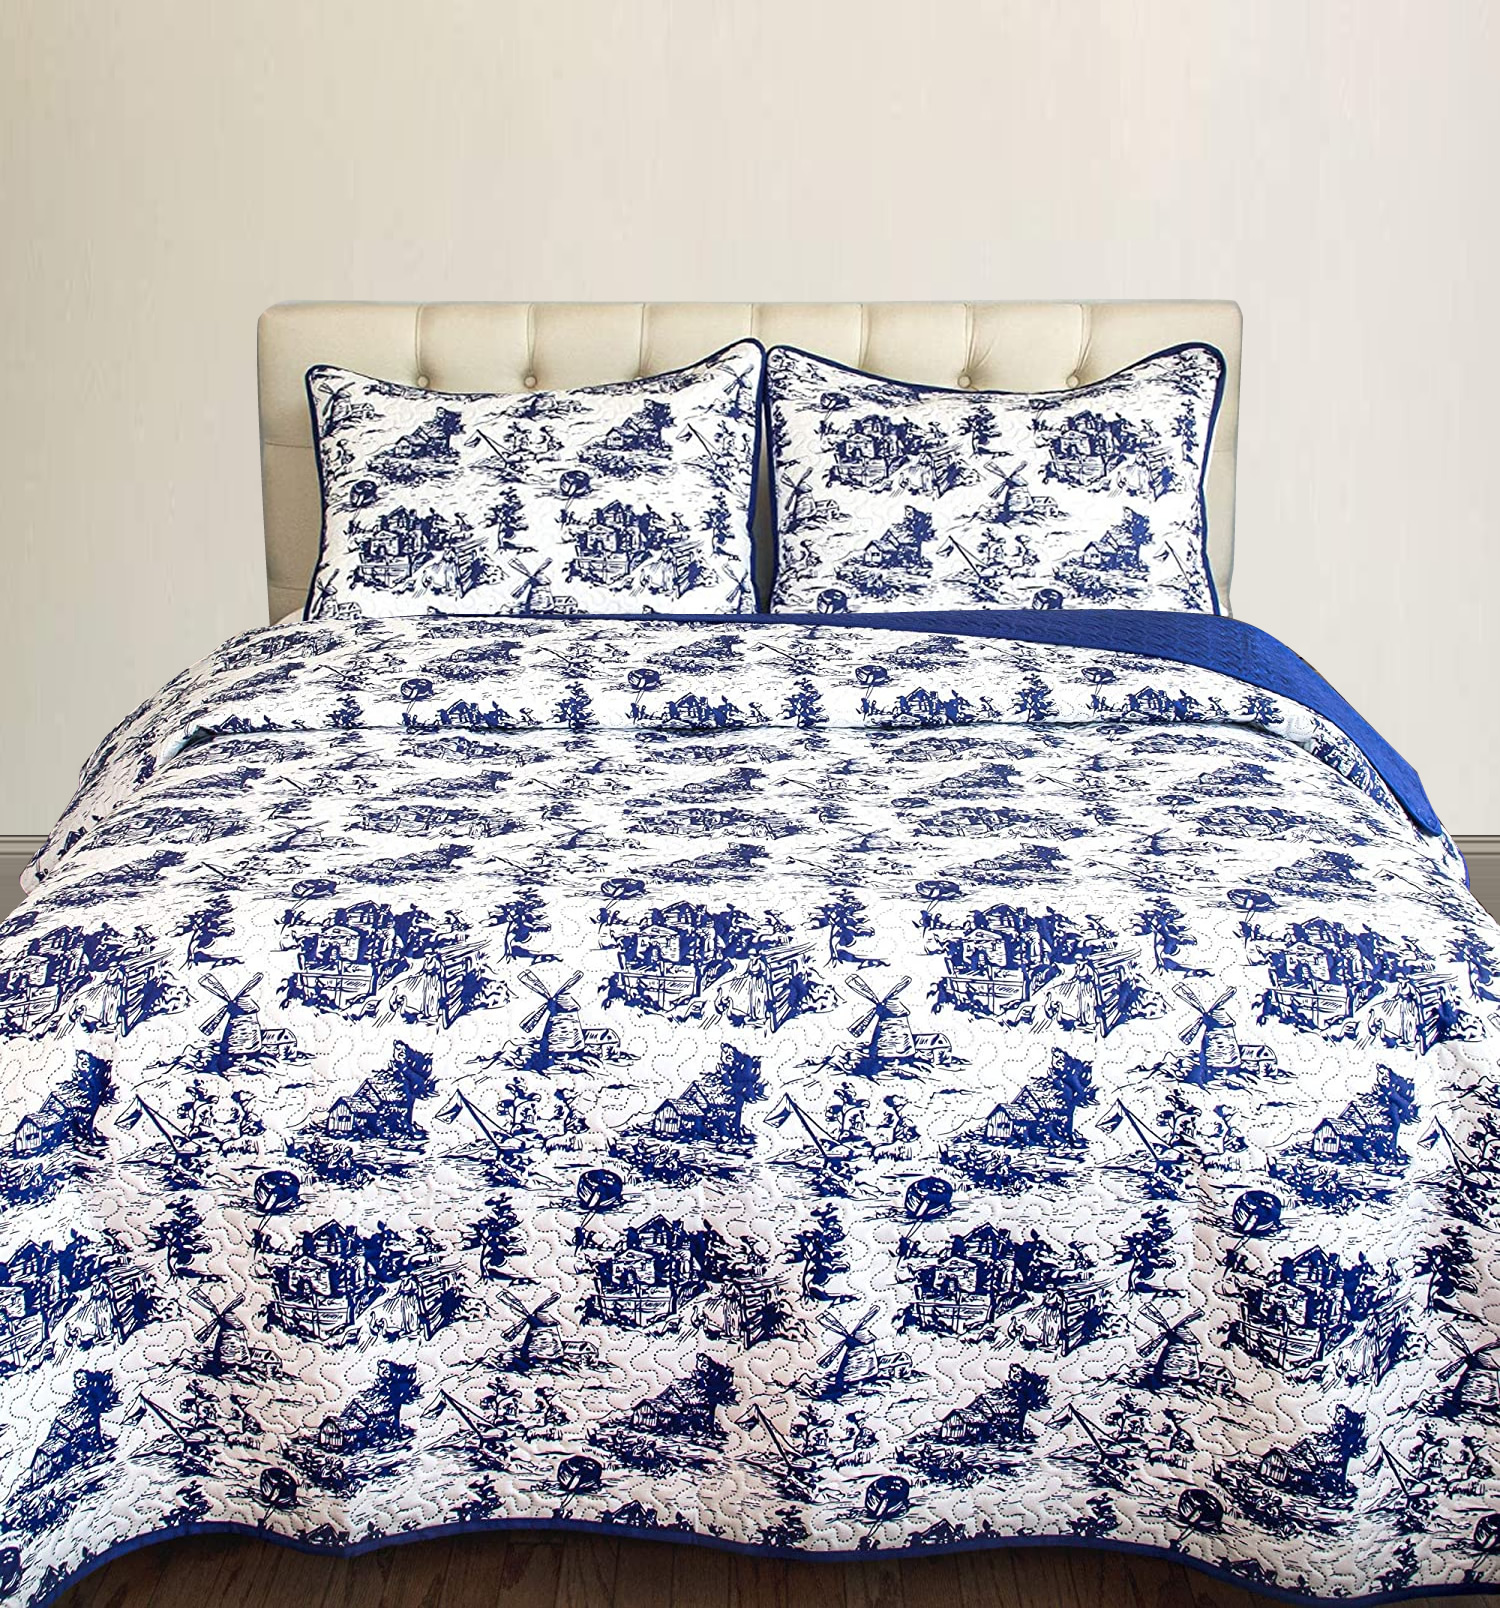 Cobalt Blue Classic Dutch Windmill Toile Print Bedding from Cozy Home